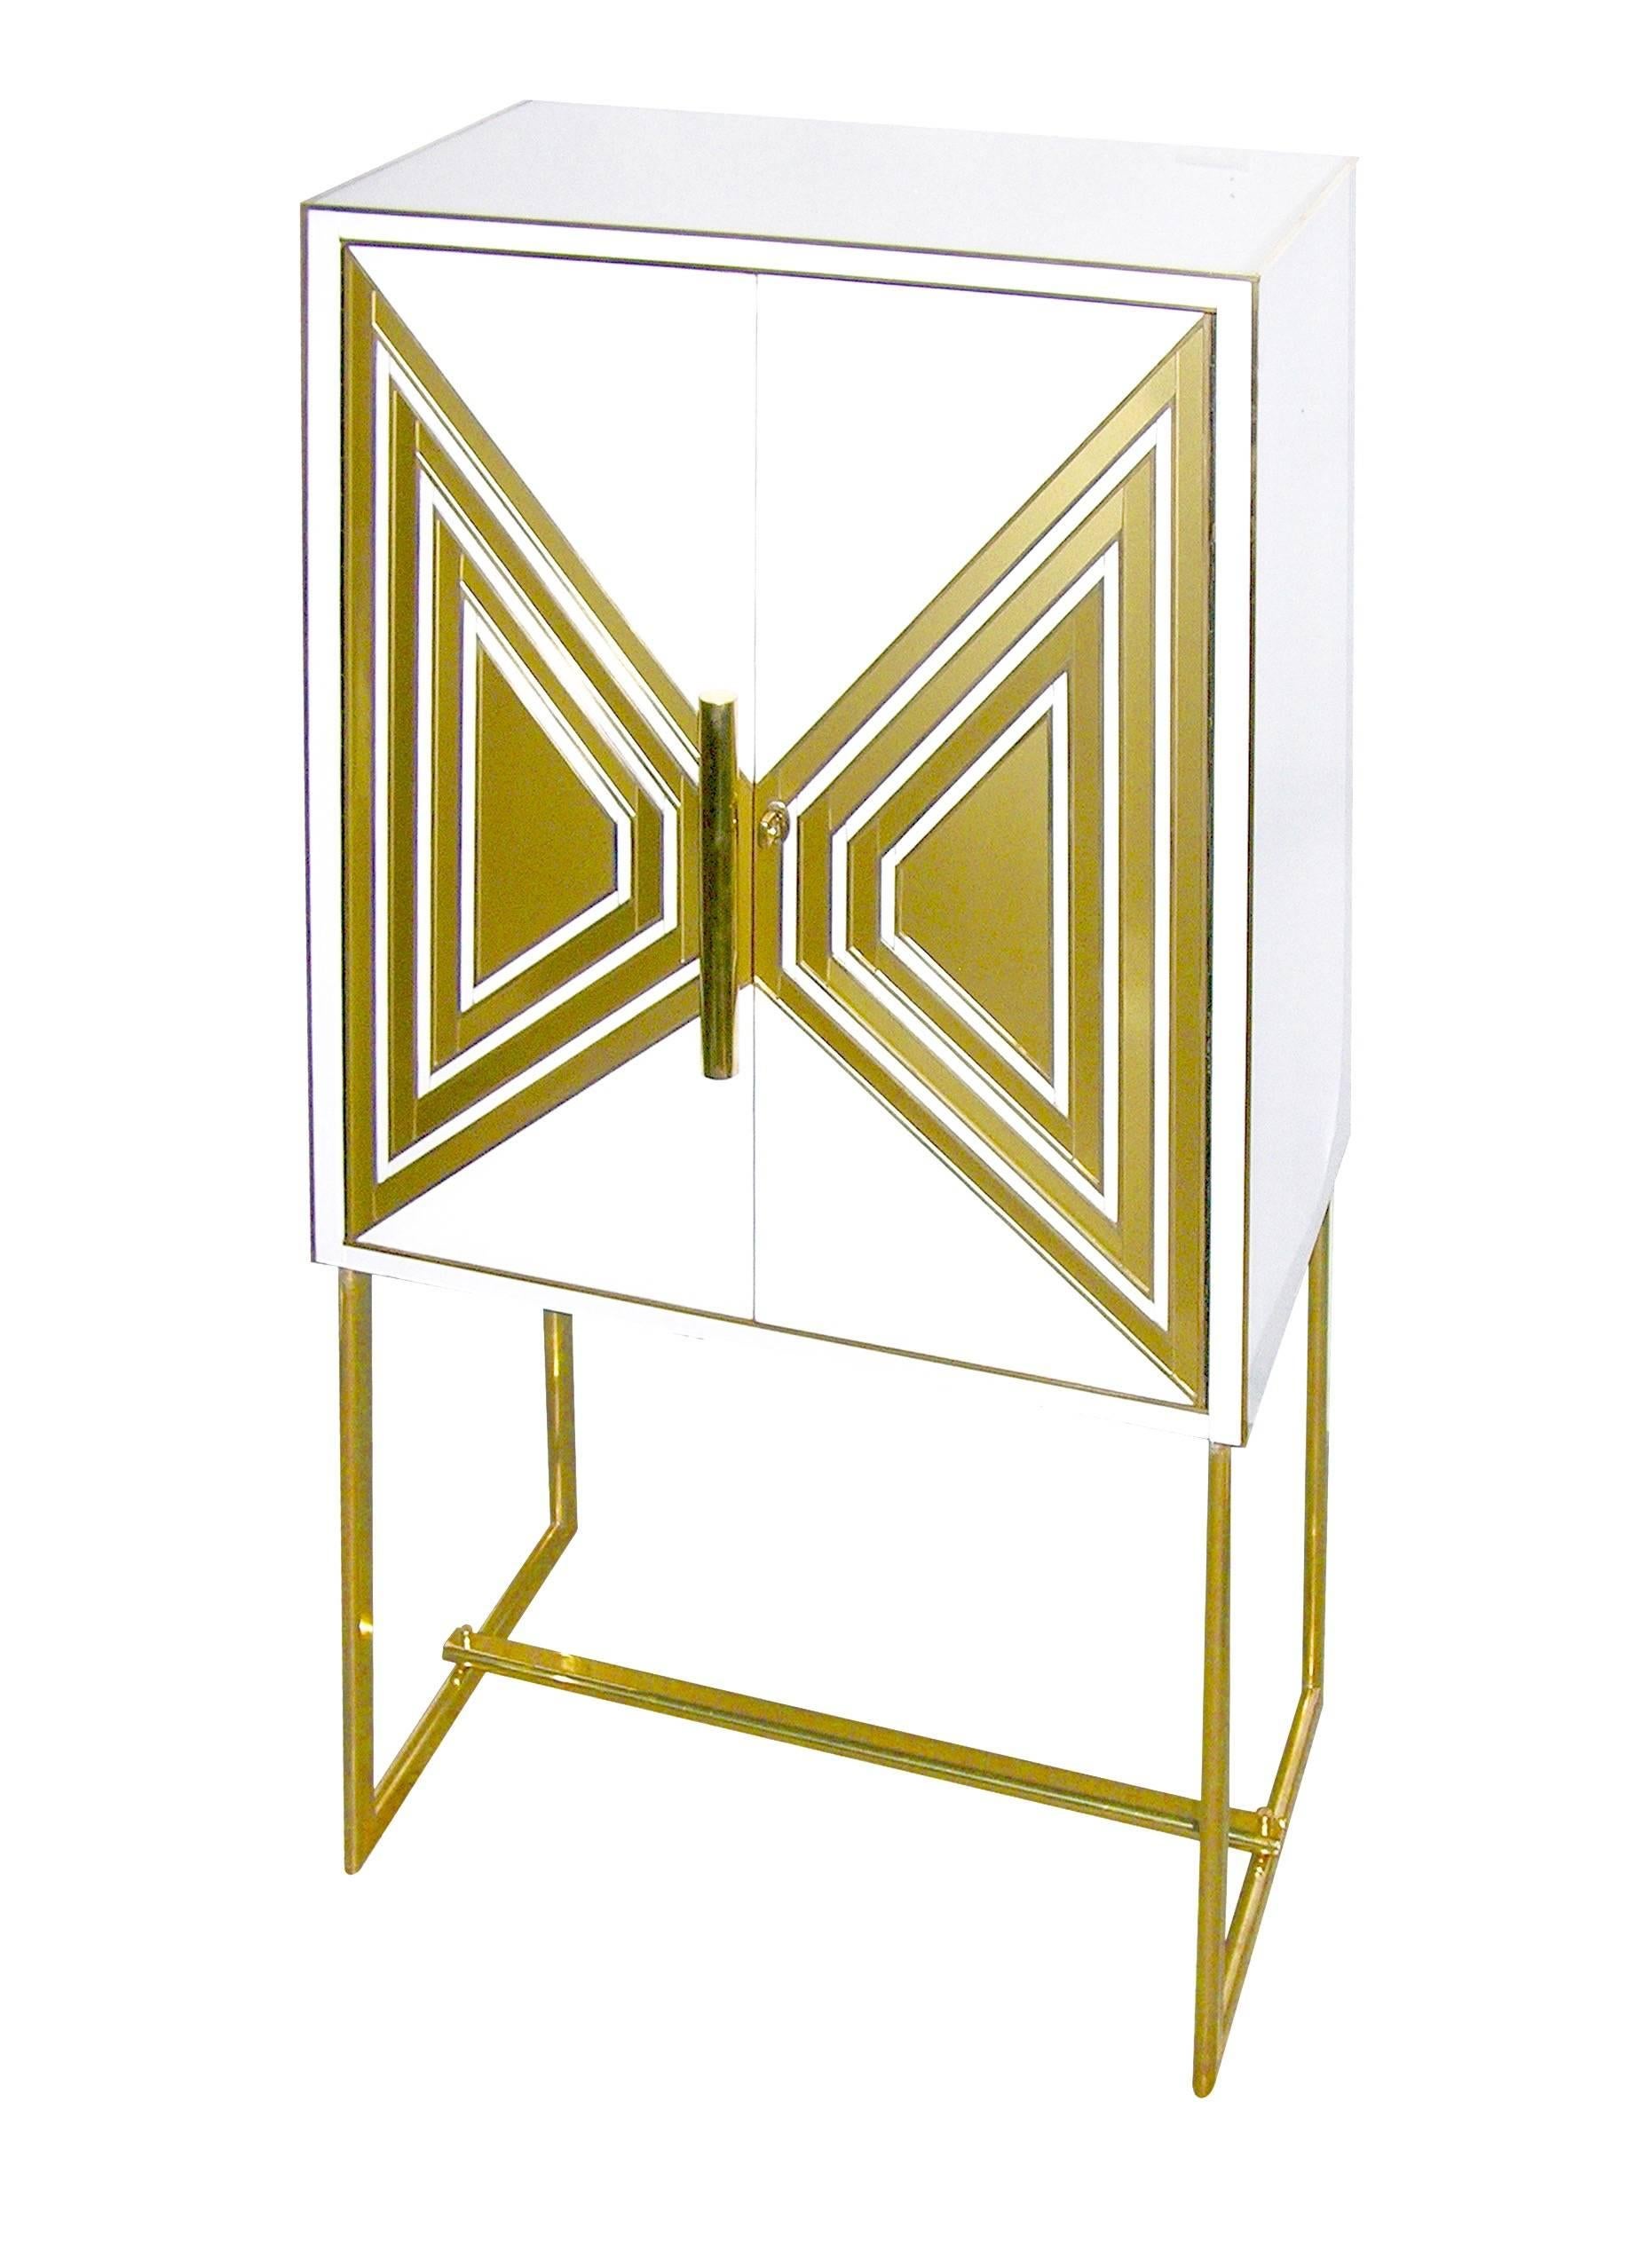 Entirely handmade pair of one-of-a-kind Italian cabinets or buffets of unique and very well thought design with trapezoid sides (depth at the top is 16.25 in.) to match the front pattern, raised on sophisticated sleek oval rounded legs hand made in